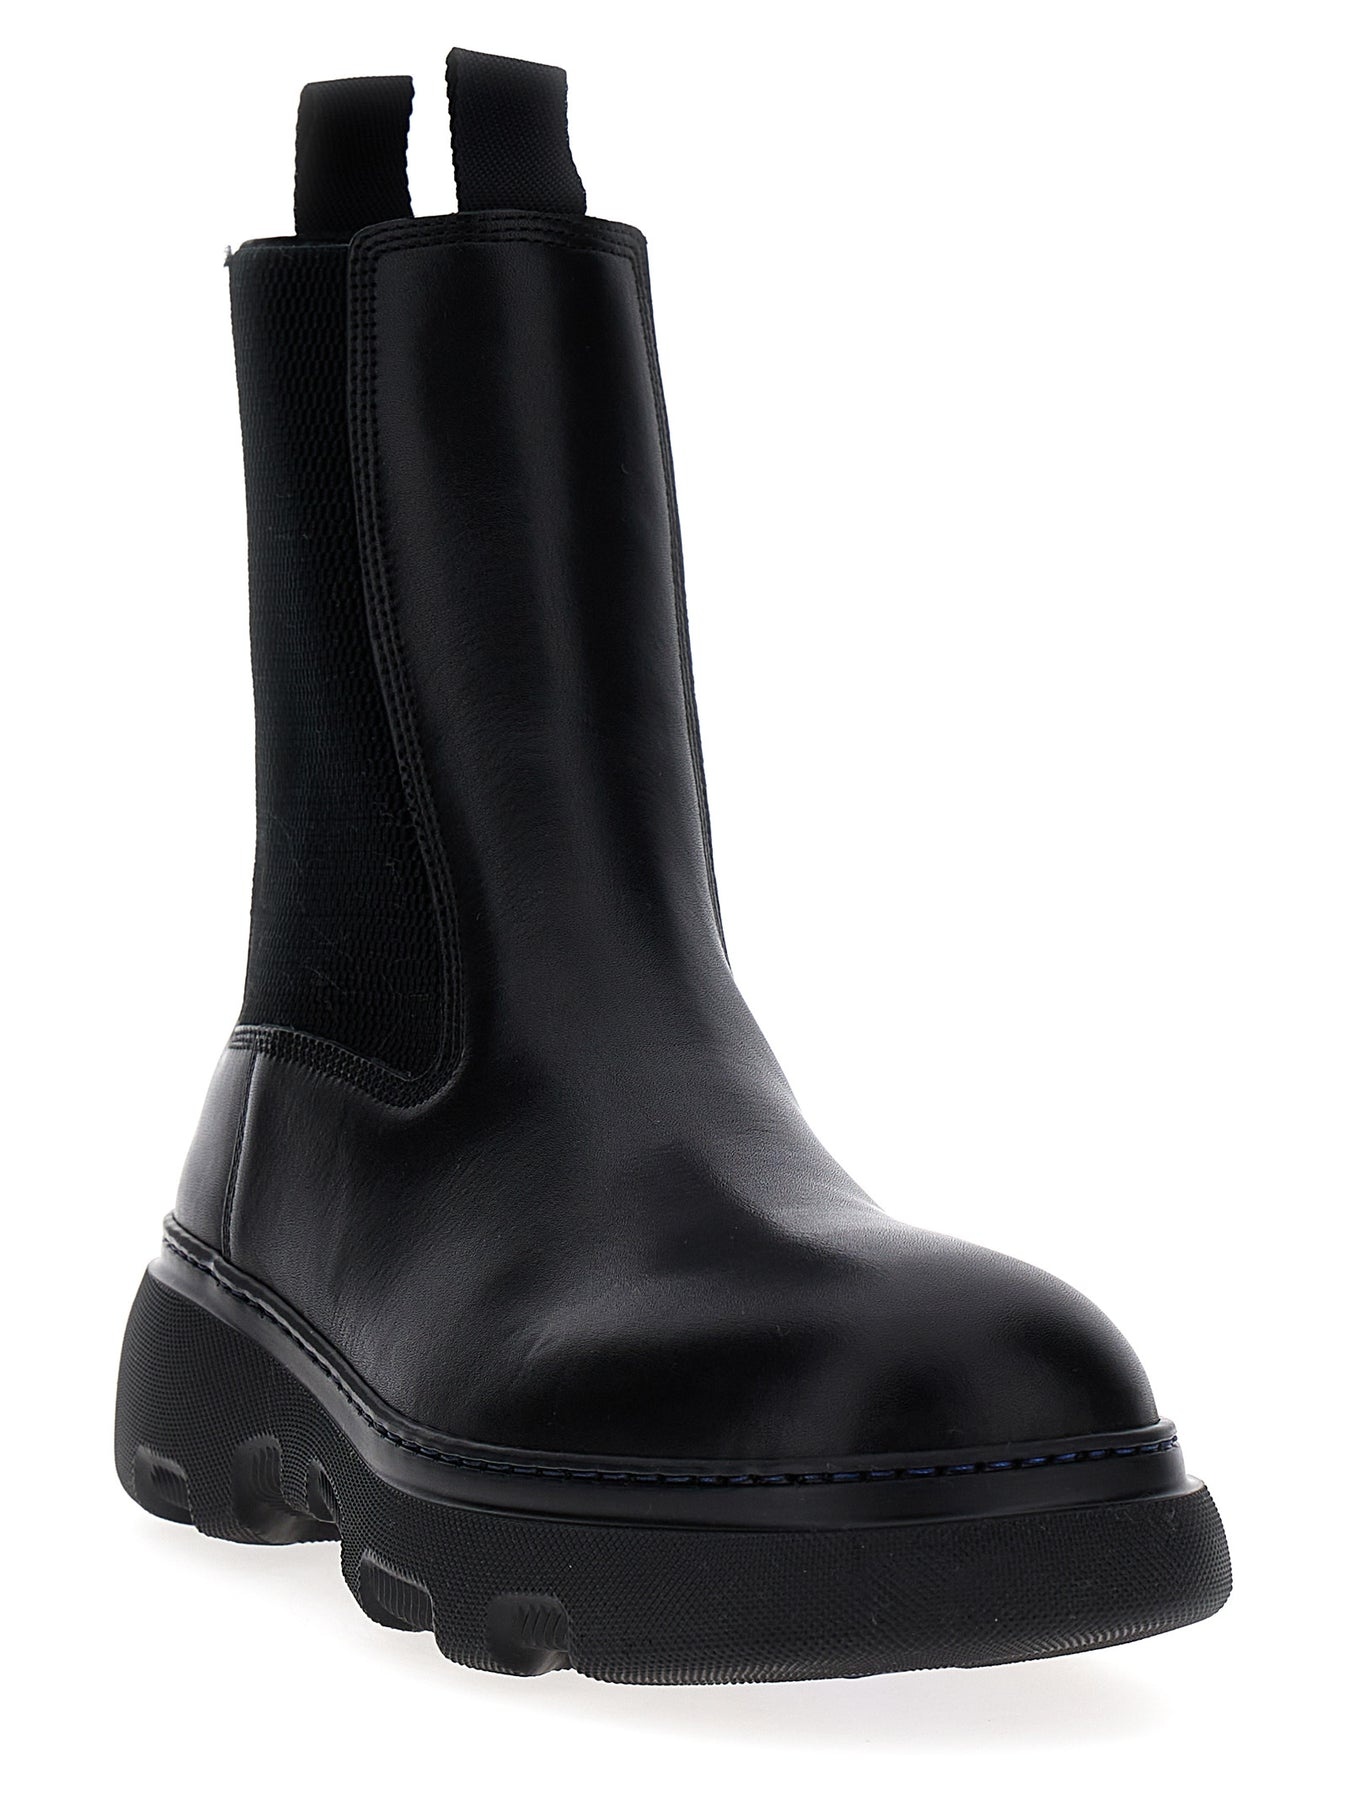 Chelsea Boots, Ankle Boots Black - 2